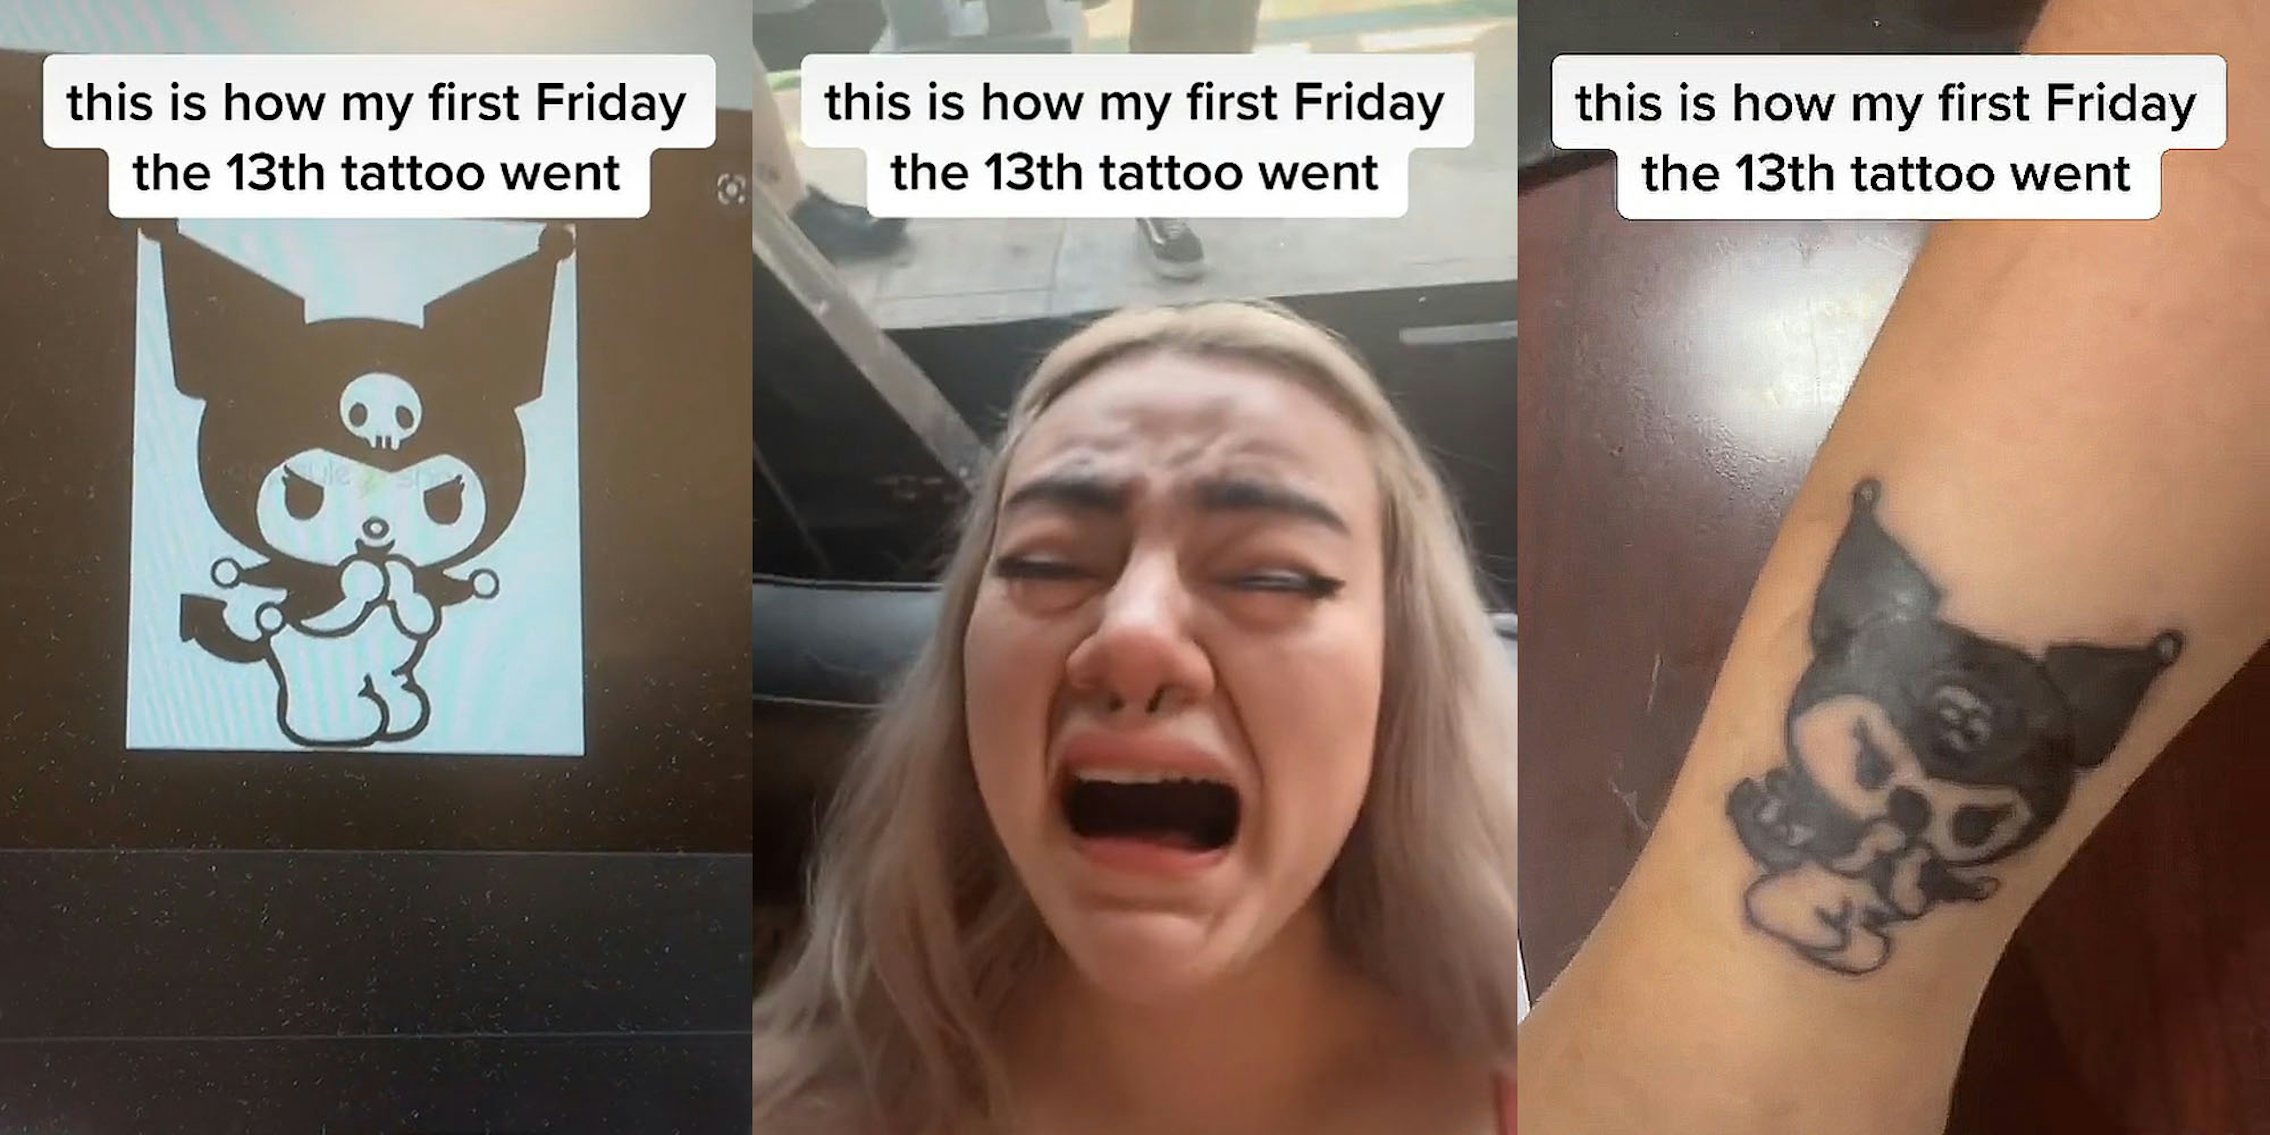 laptop screen with simple character on screen caption 'this is how my first Friday the 13th tattoo went' (l) woman open mouth crying caption 'this is how my first Friday the 13th tattoo went' (c) woman's arm with tattoo caption 'this is how my first Friday the 13th tattoo went' (r)